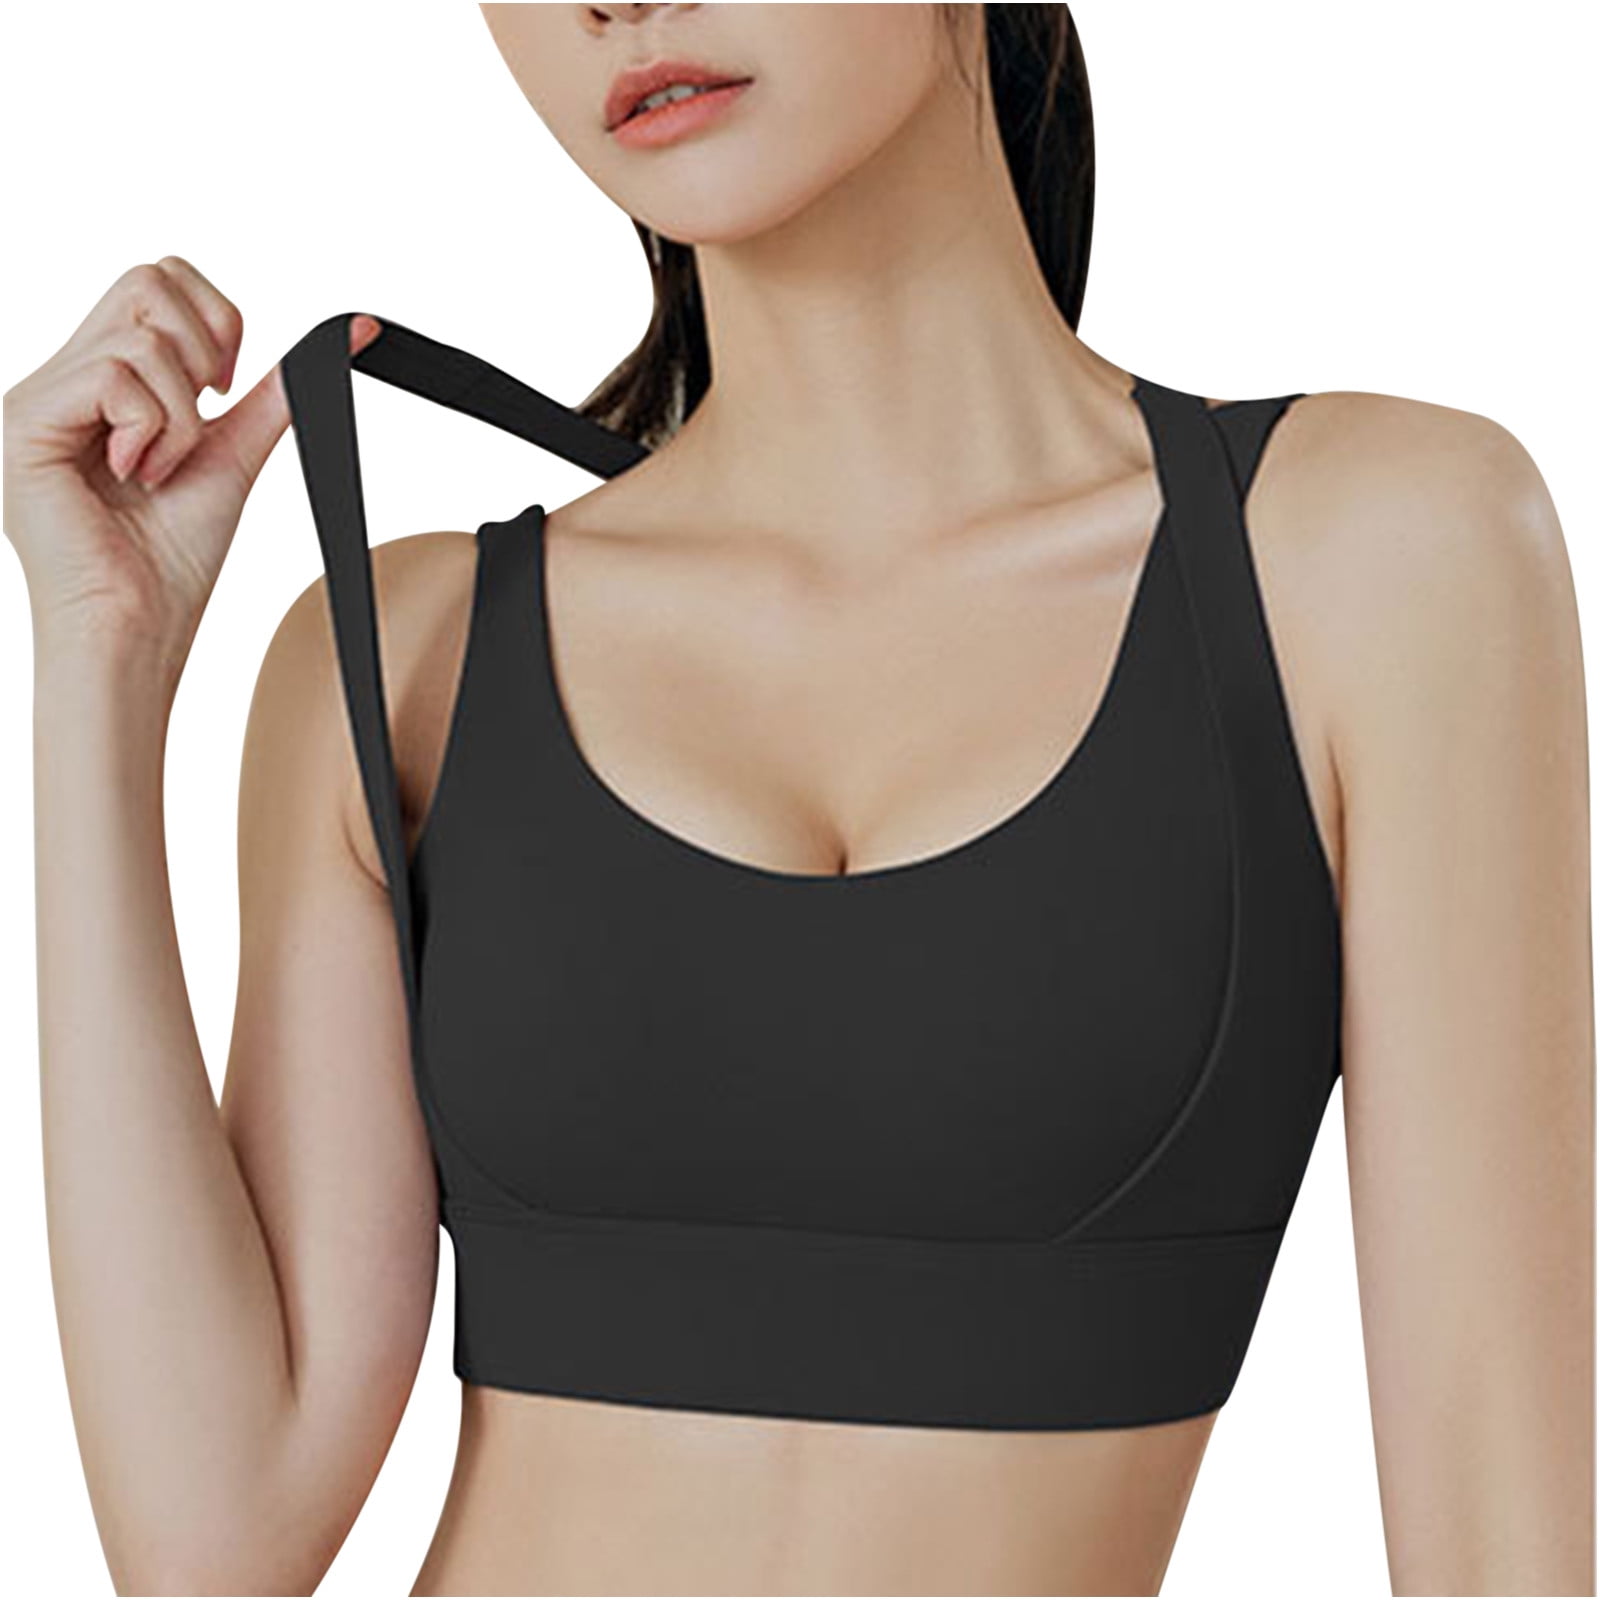 absuyy Sports Bras for Women Running Breathable Comfortable High Strength  Detachable Beauty Back Yoga Workout Fitness Bra Gray Size L 